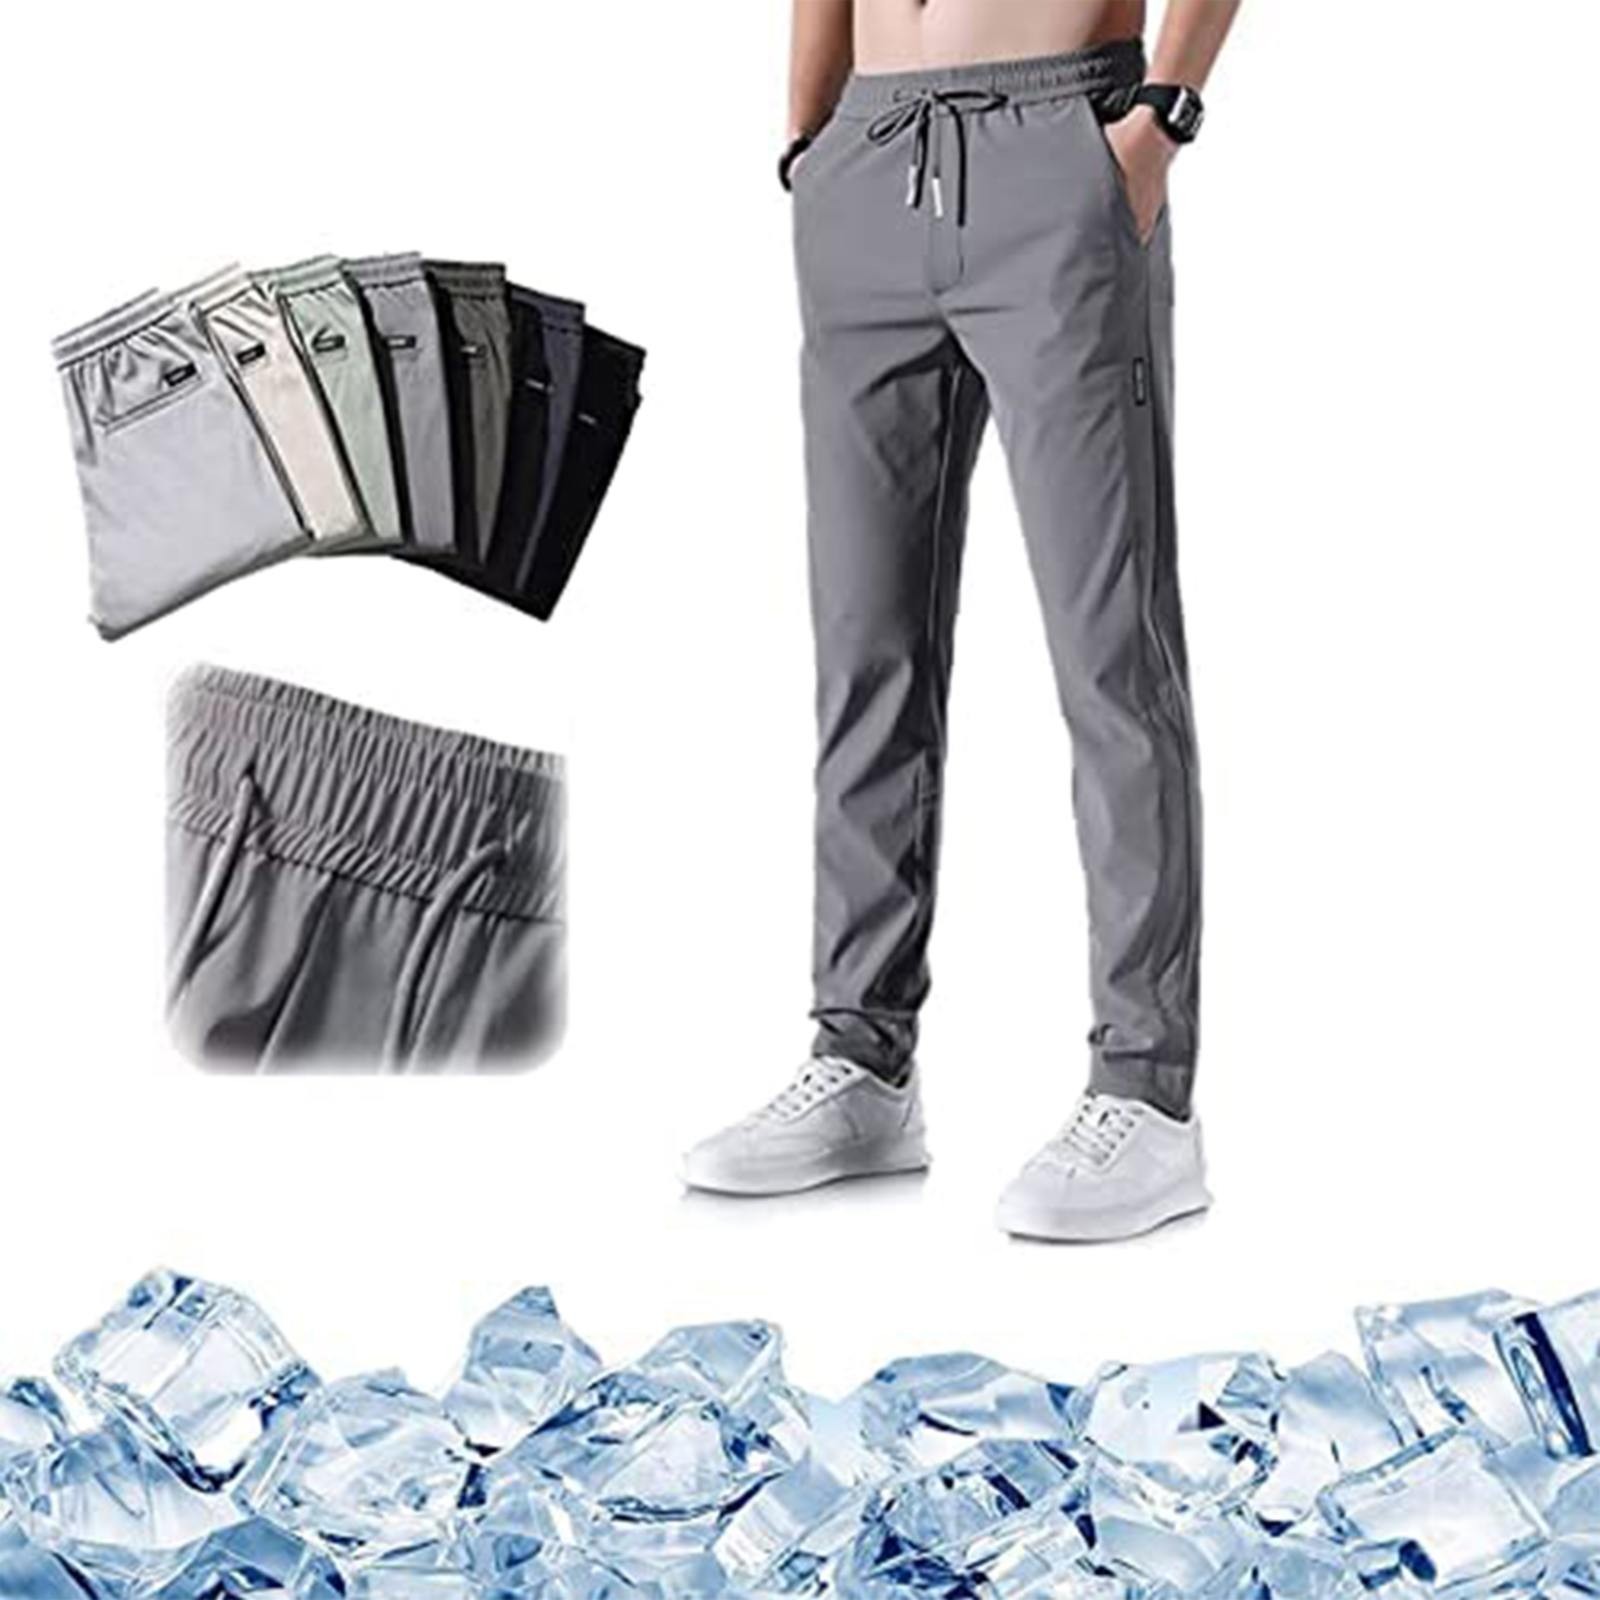 Camo Cargo Pants For Men Skinny Fit Fast Dry Stretch Pants Ice Cool ...